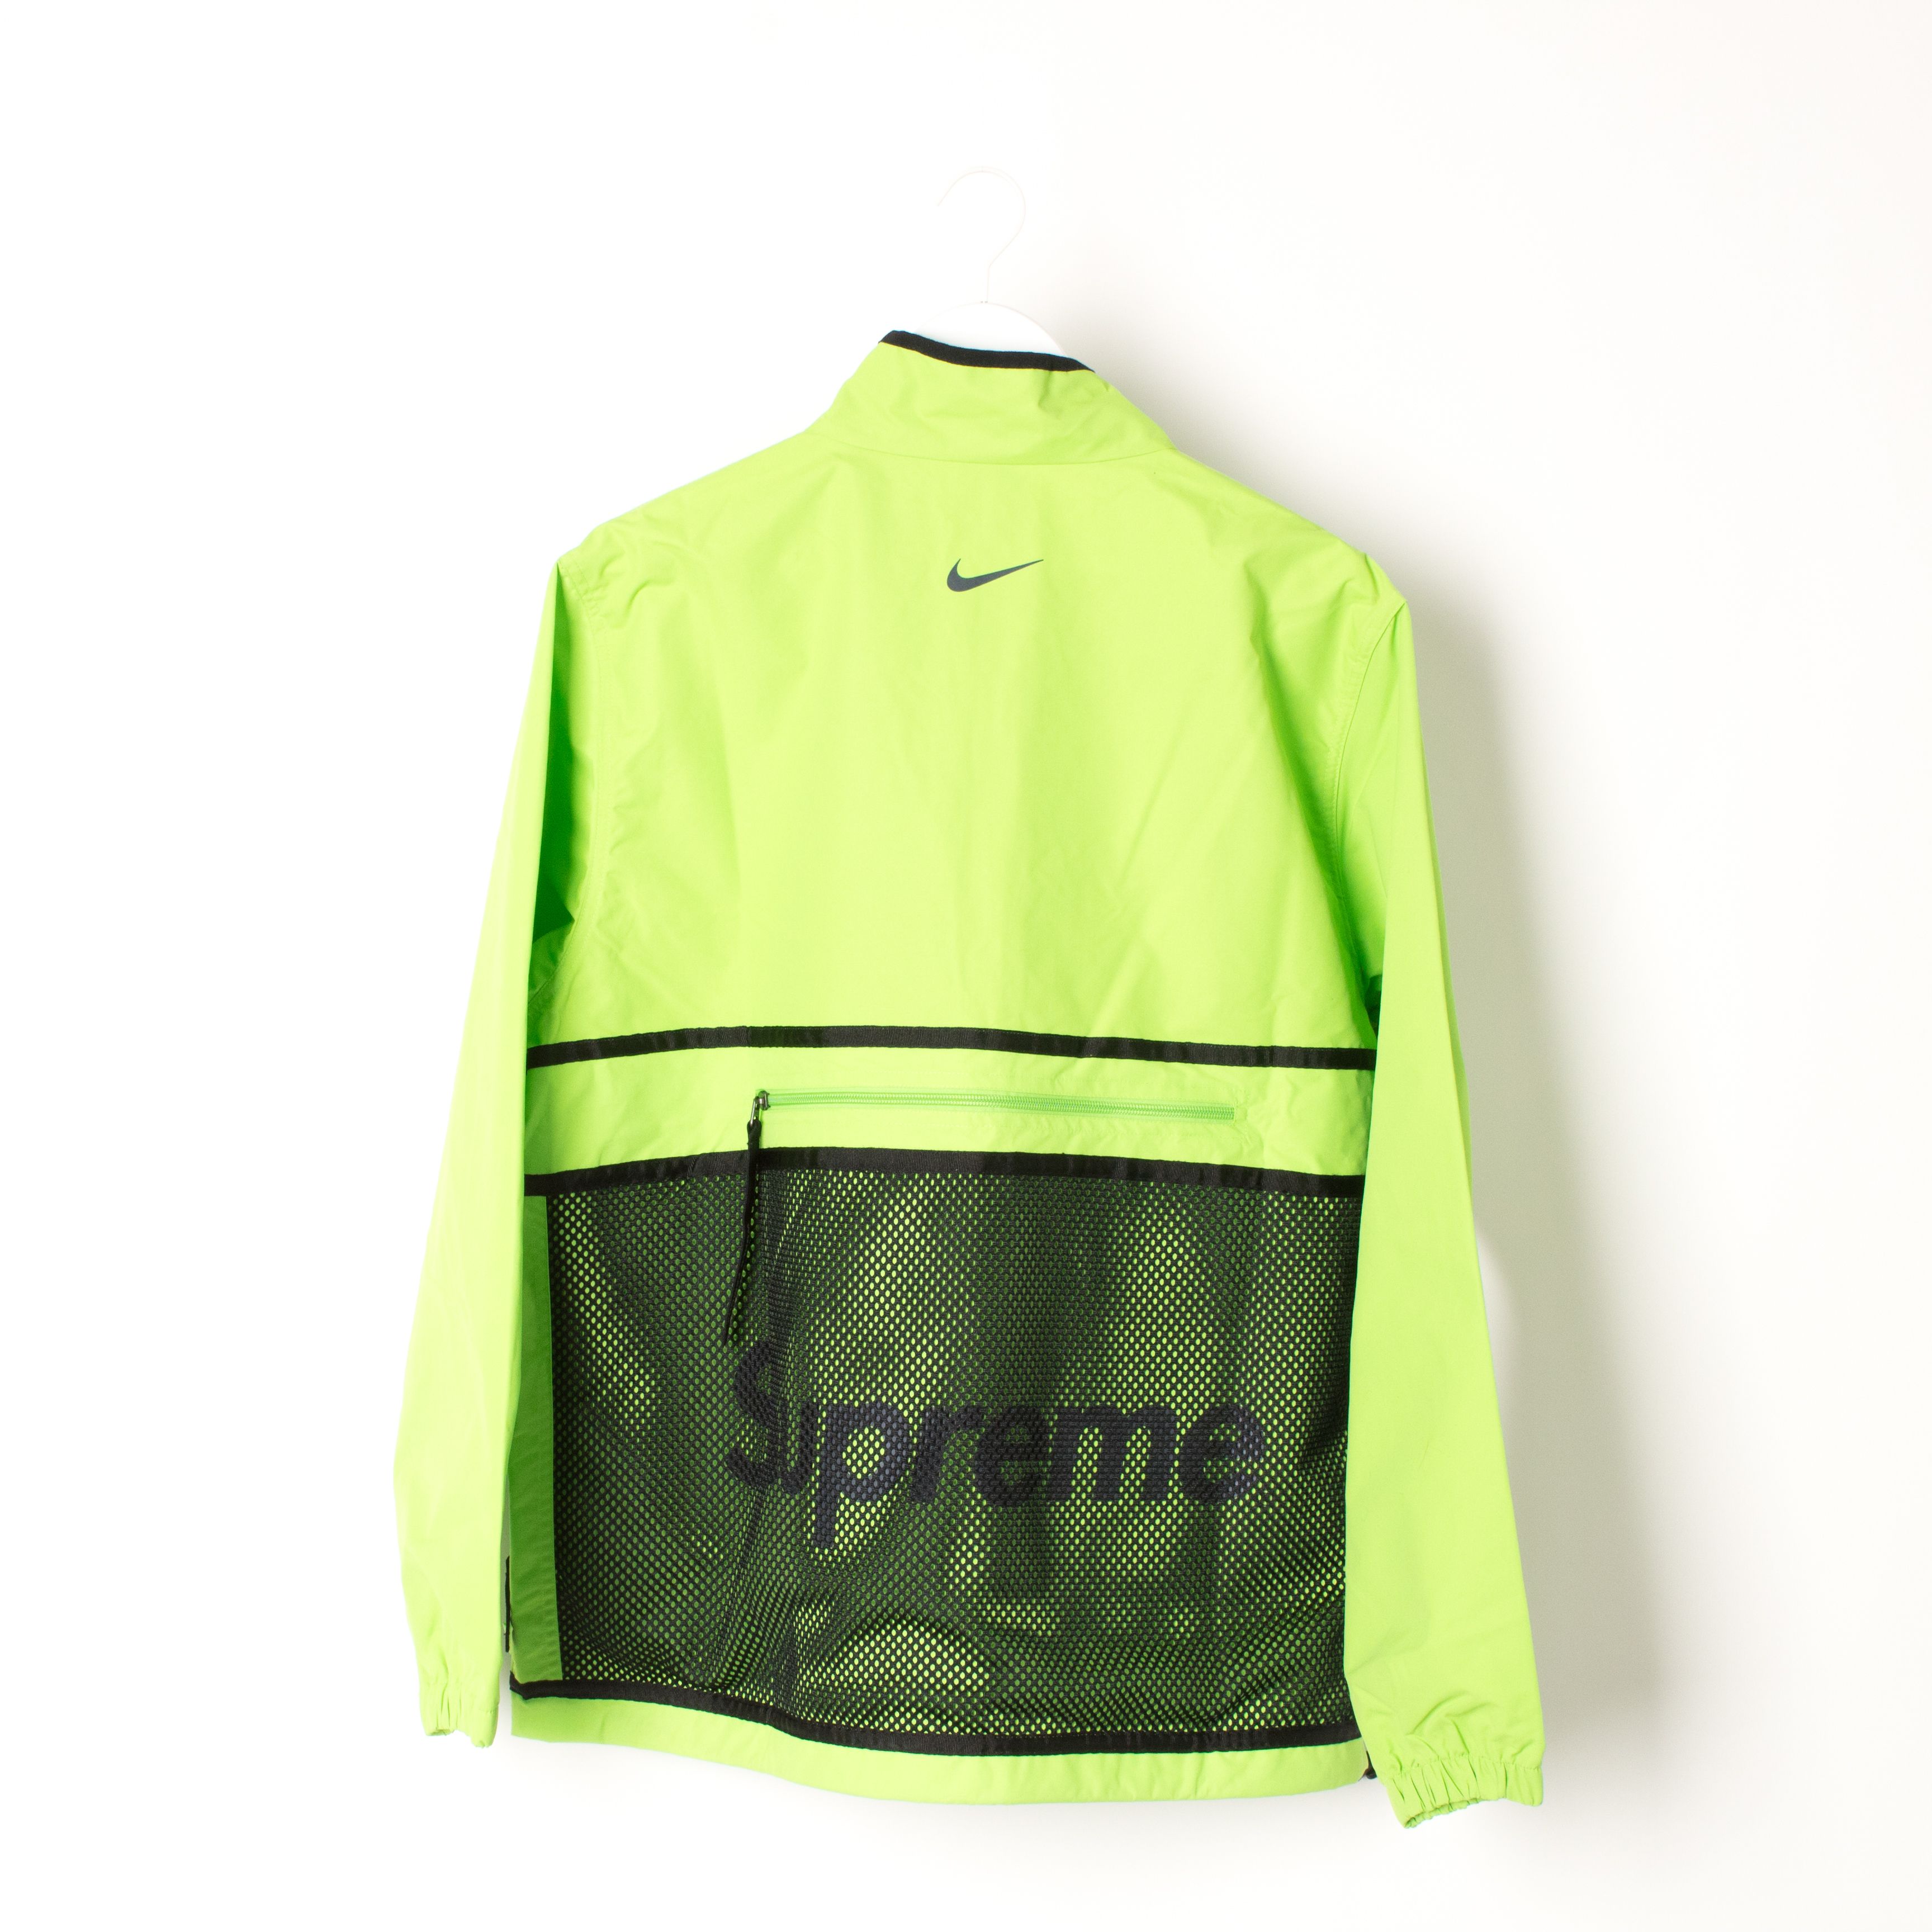 Supreme x Nike Trail Running Jacket by YehMe2 | Basic.Space